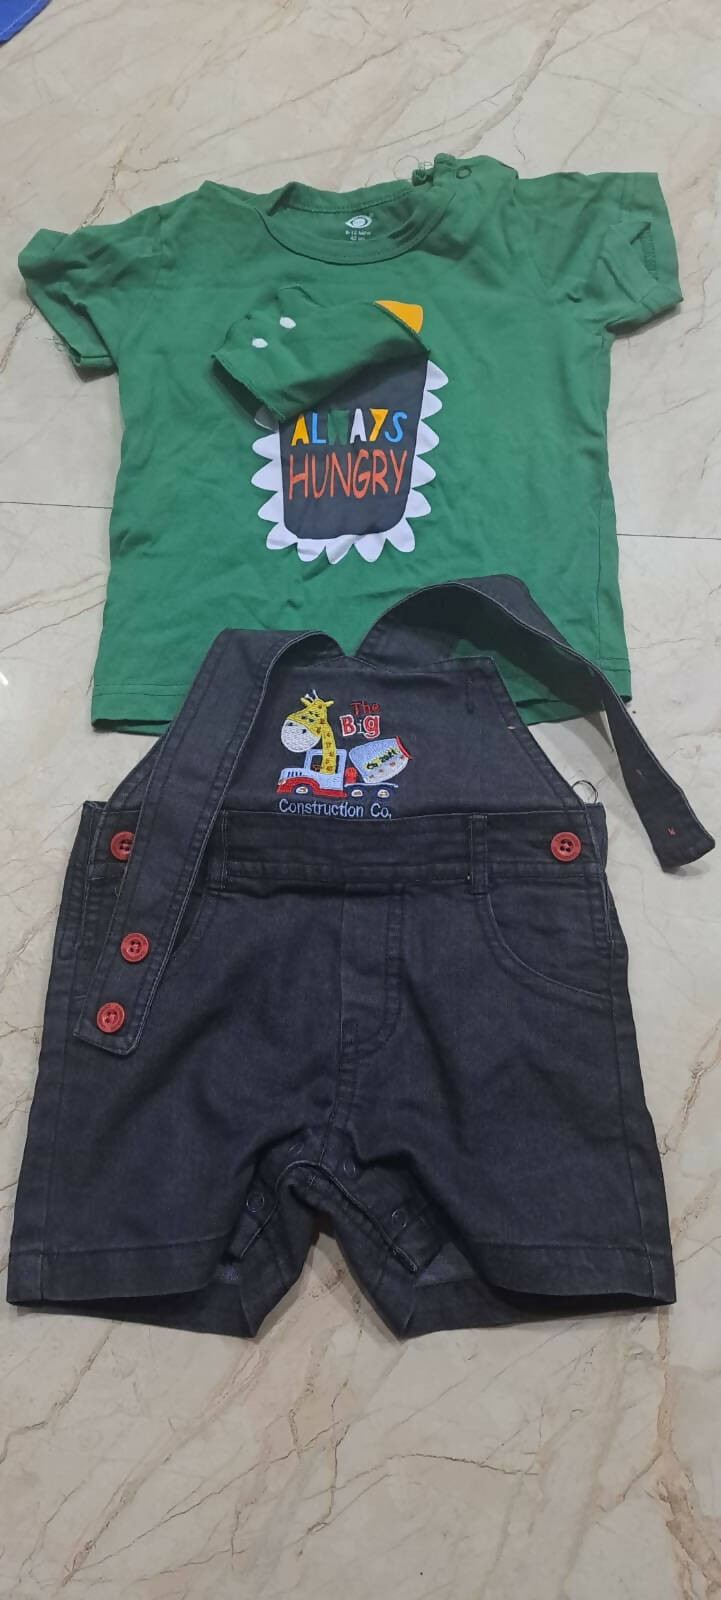 Clothes for Boy - Combo Of 5 (Hardly used)